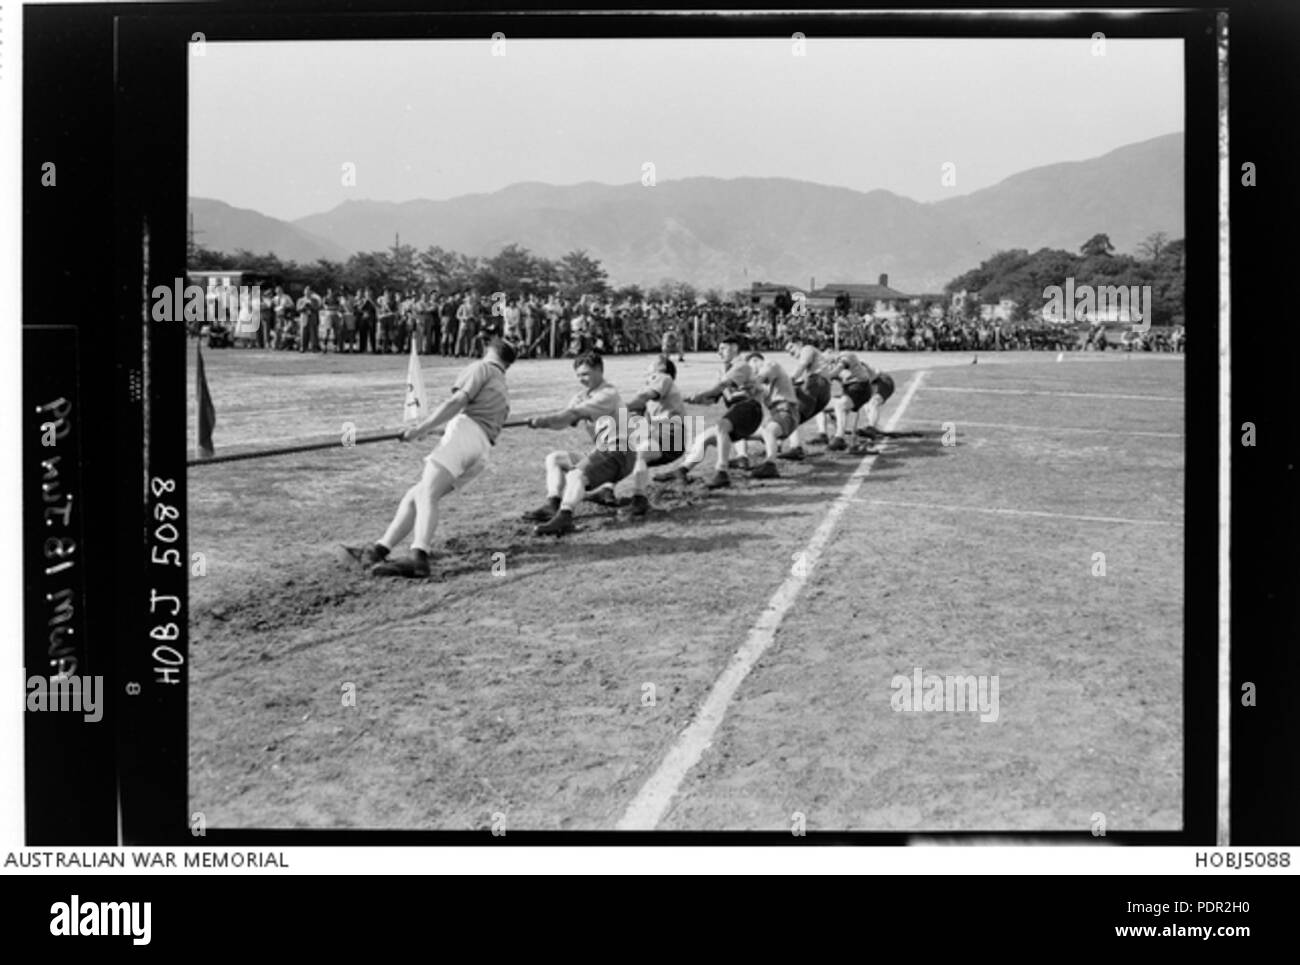 60 HOBJ5088 The Anzac tug of war team pulling during the British Commonwealth Forces Korea (BCFK) Annual Athletic Meeting Stock Photo